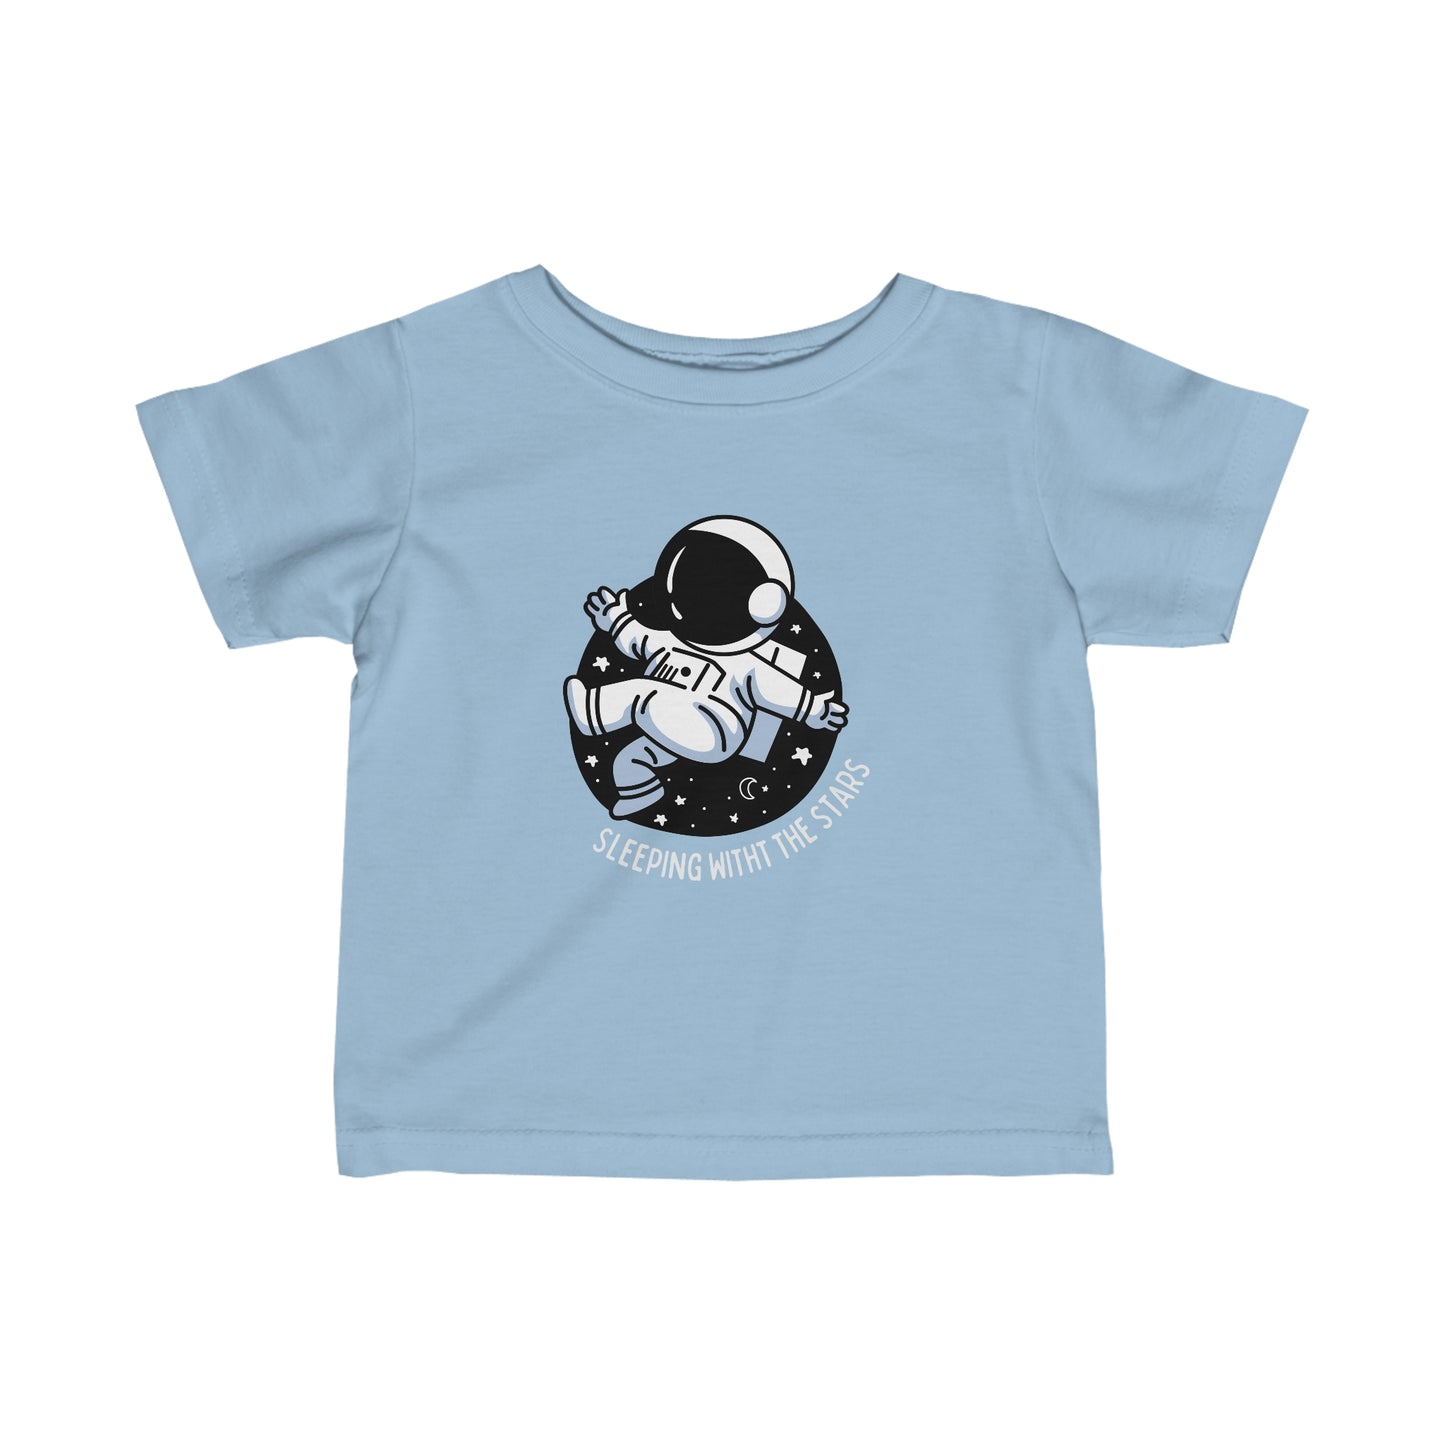 Sleeping With The Stars.. Infant Fine Jersey Tee